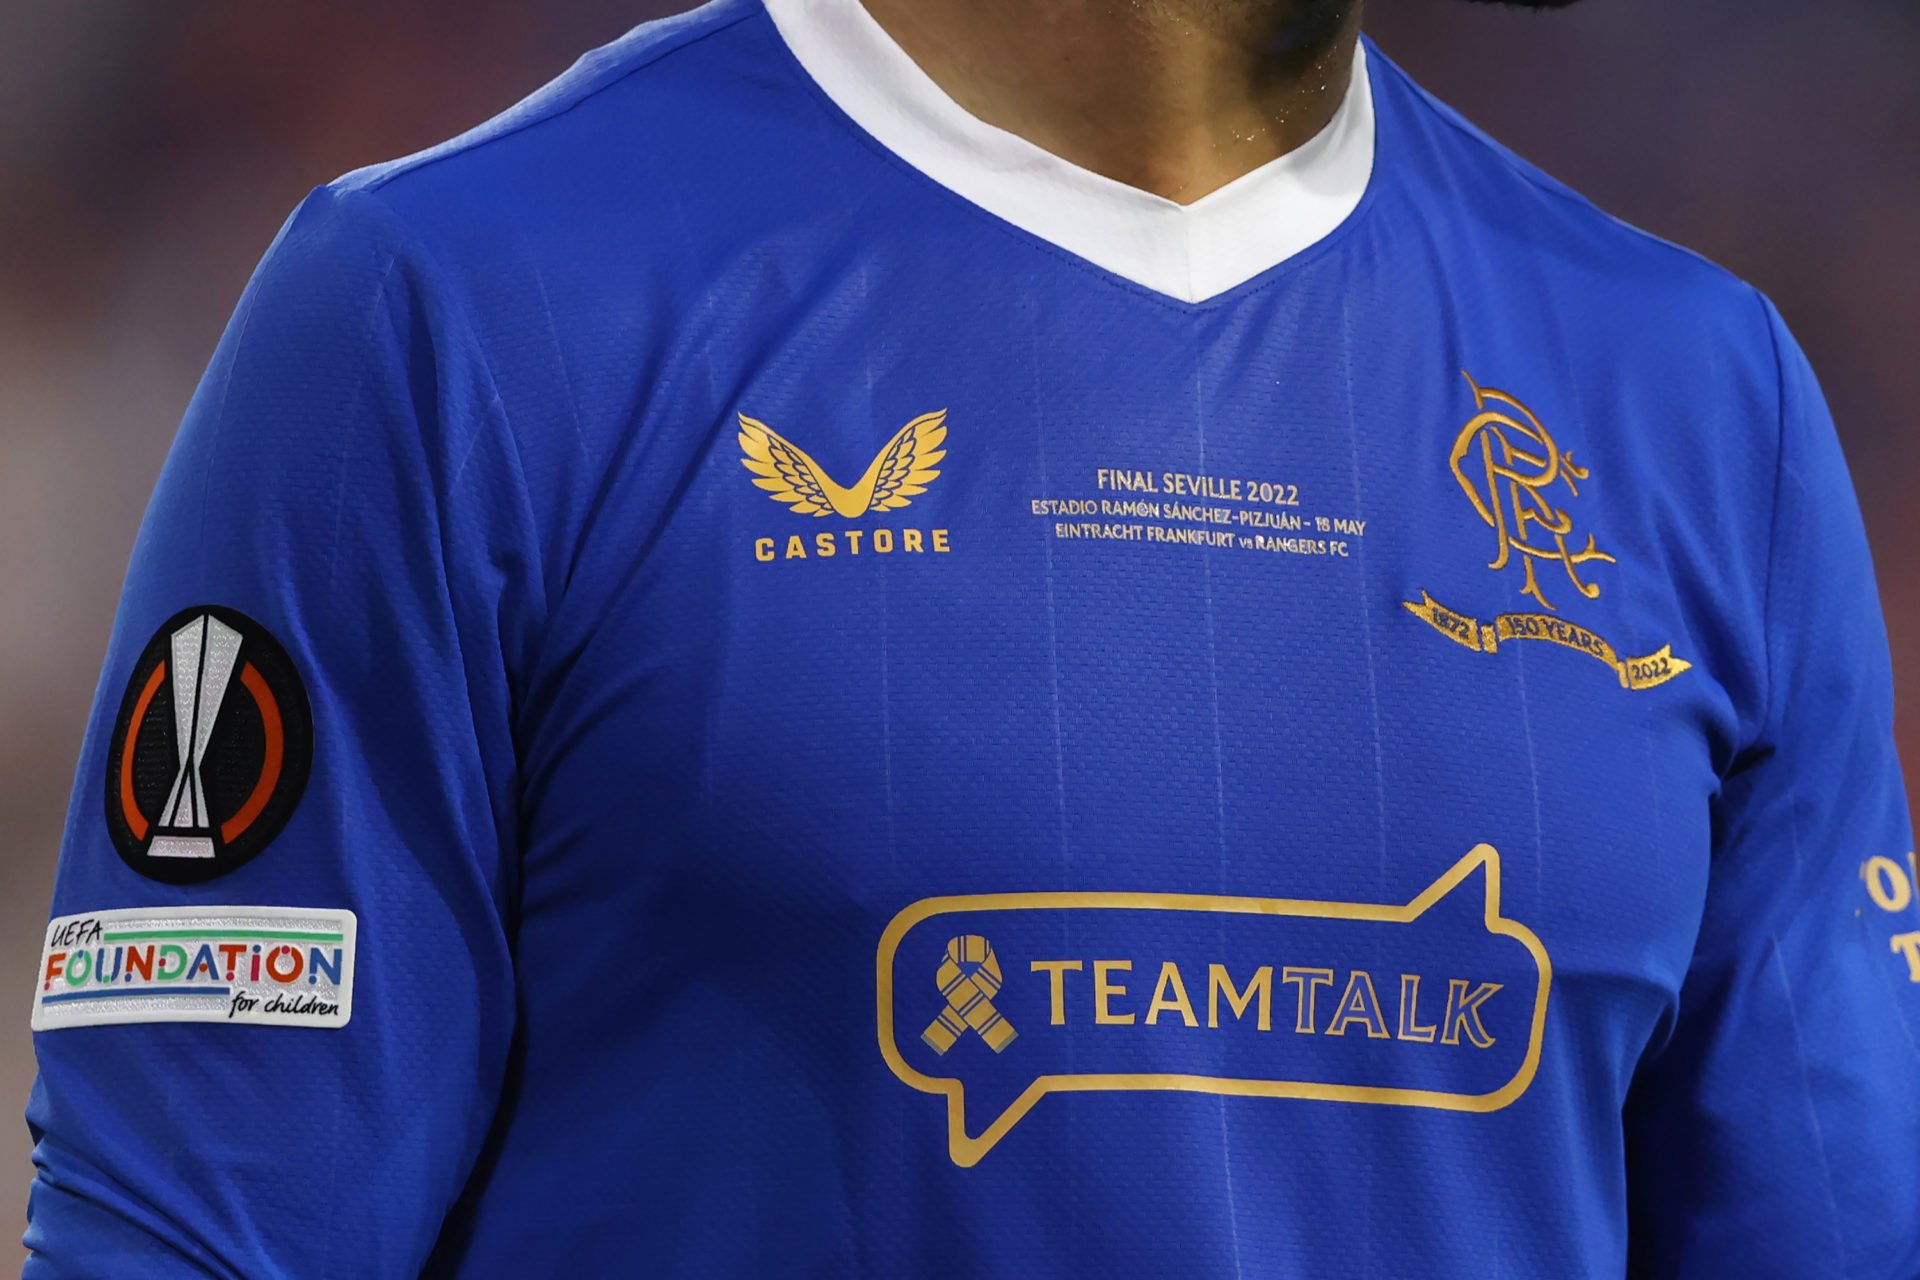 Ranking Rangers' 10 Best Home Kits of All Time